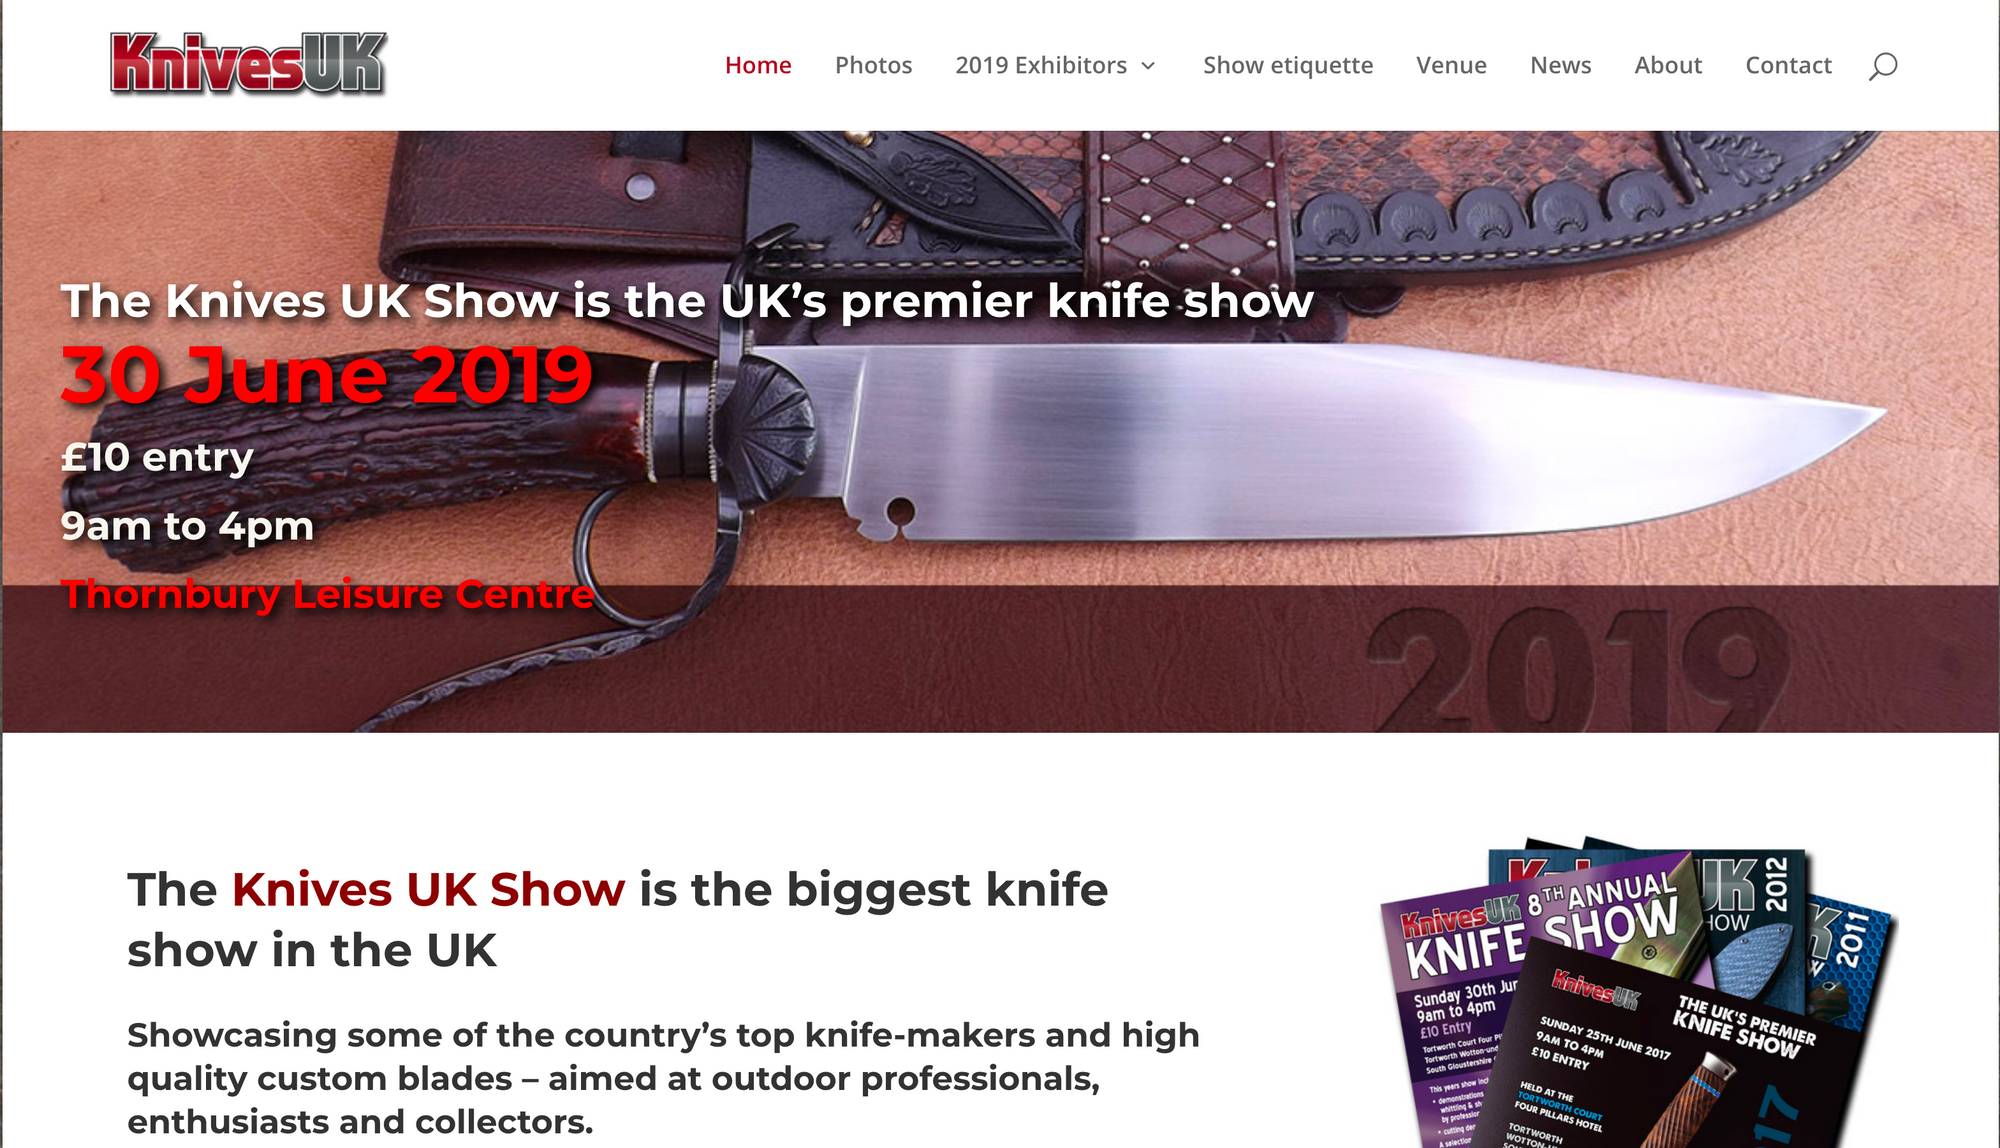 Come and join us at the 2019 Knives UK Exhibition